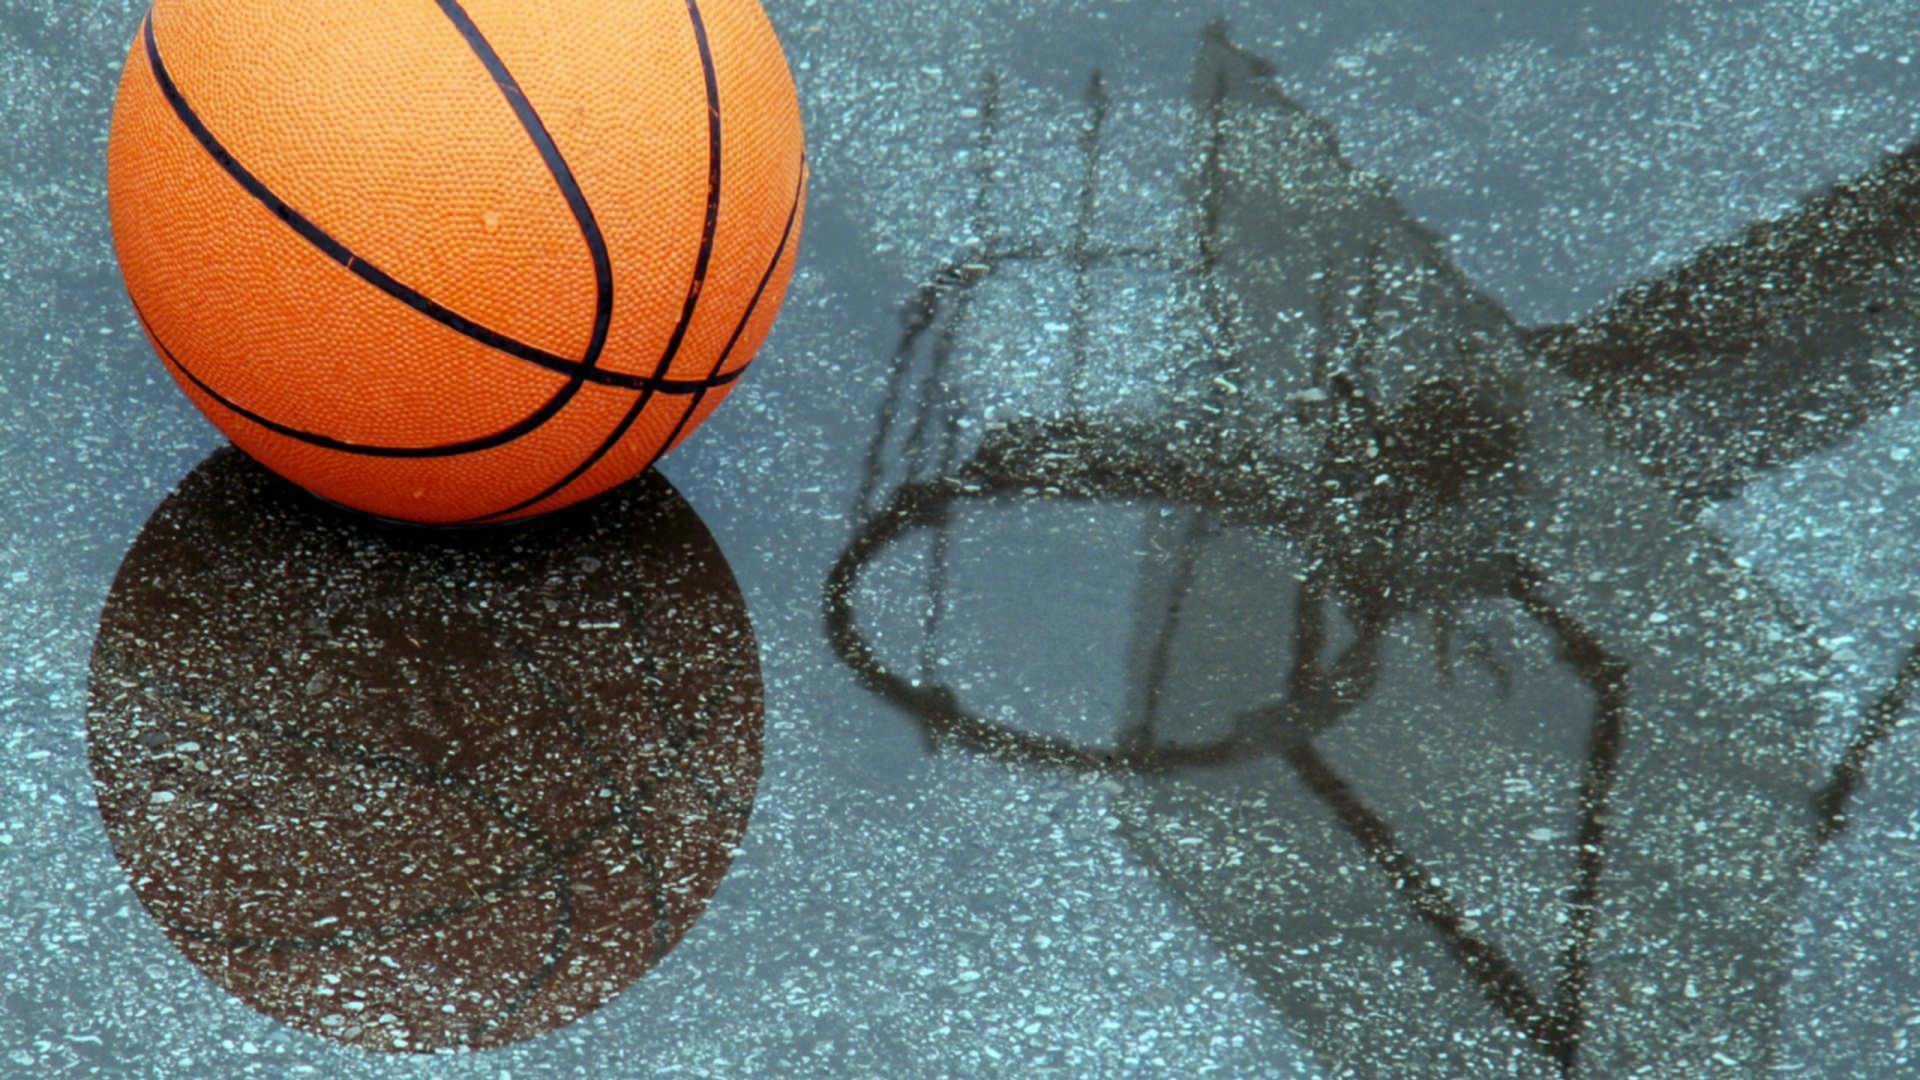 1920x1080 Cool Basketball Background